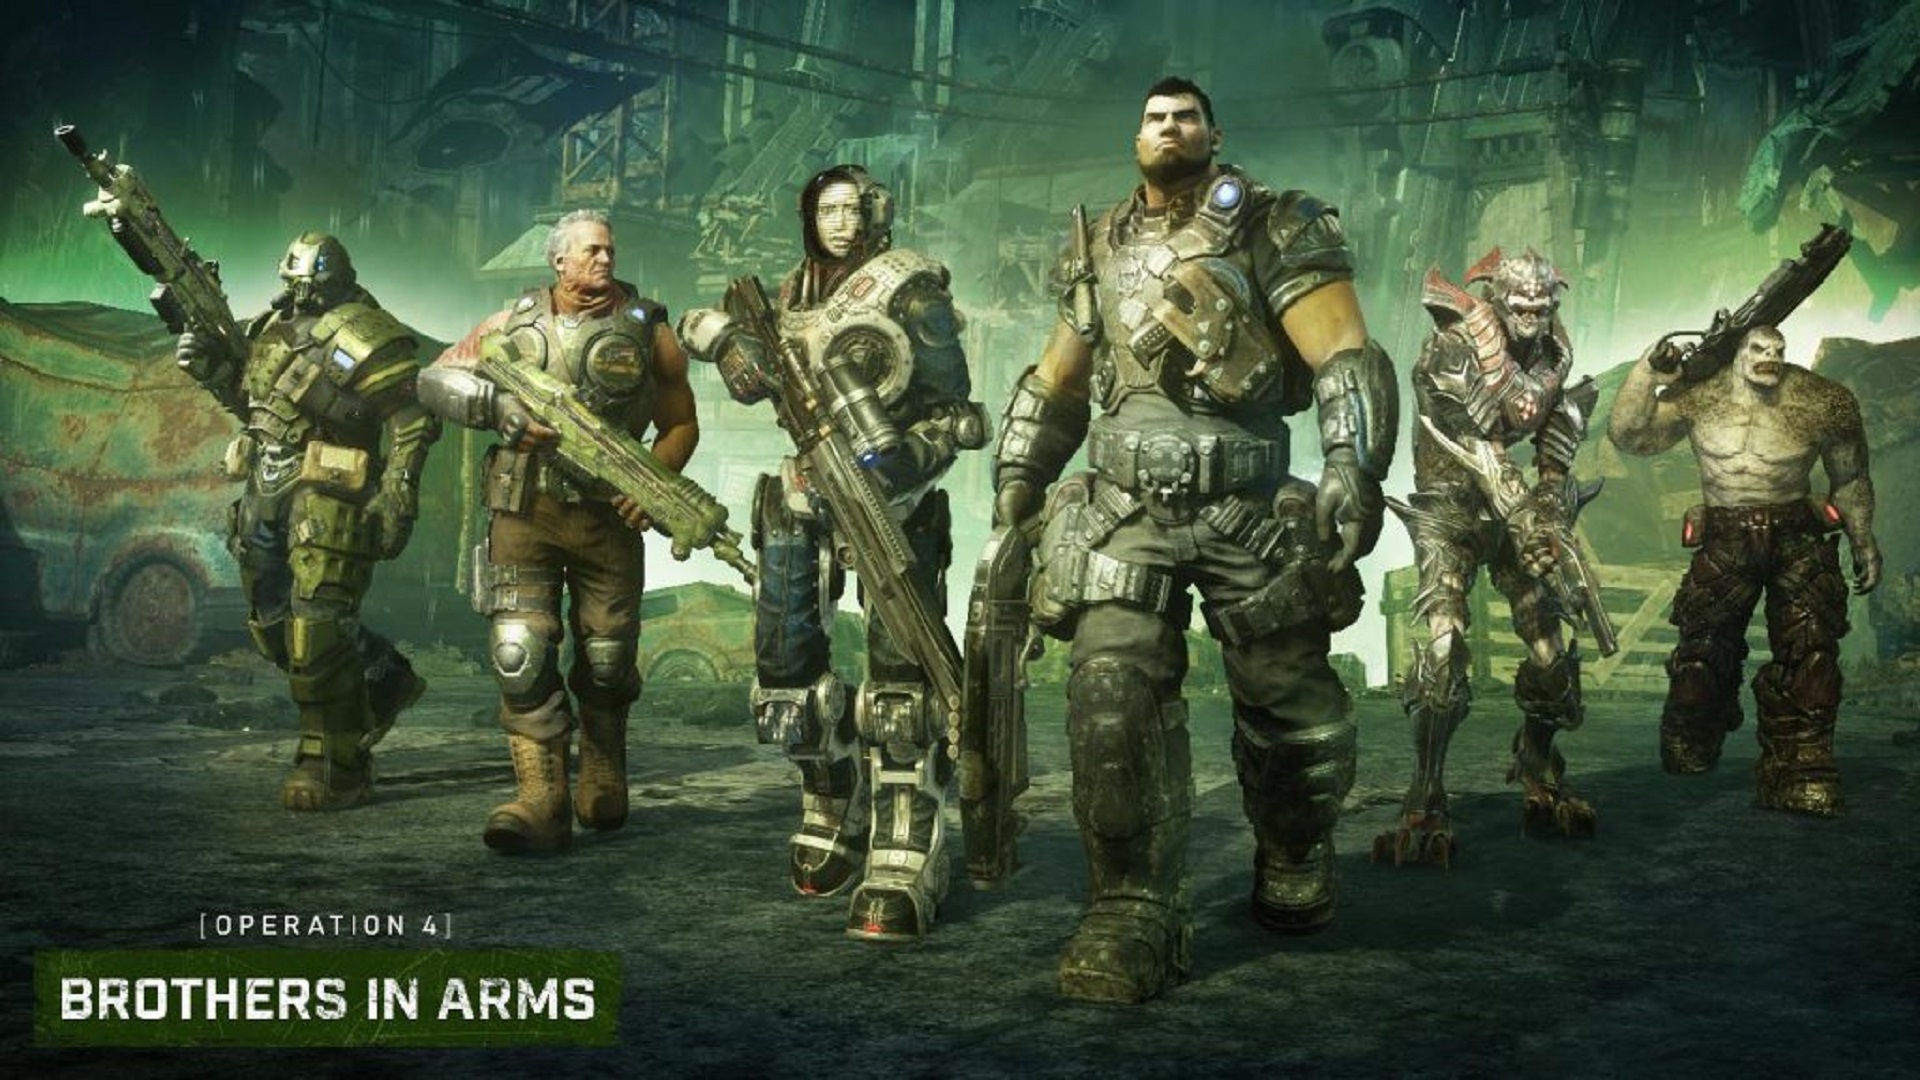 Gears 5 - Multiplayer Characters: Armored Barrick 